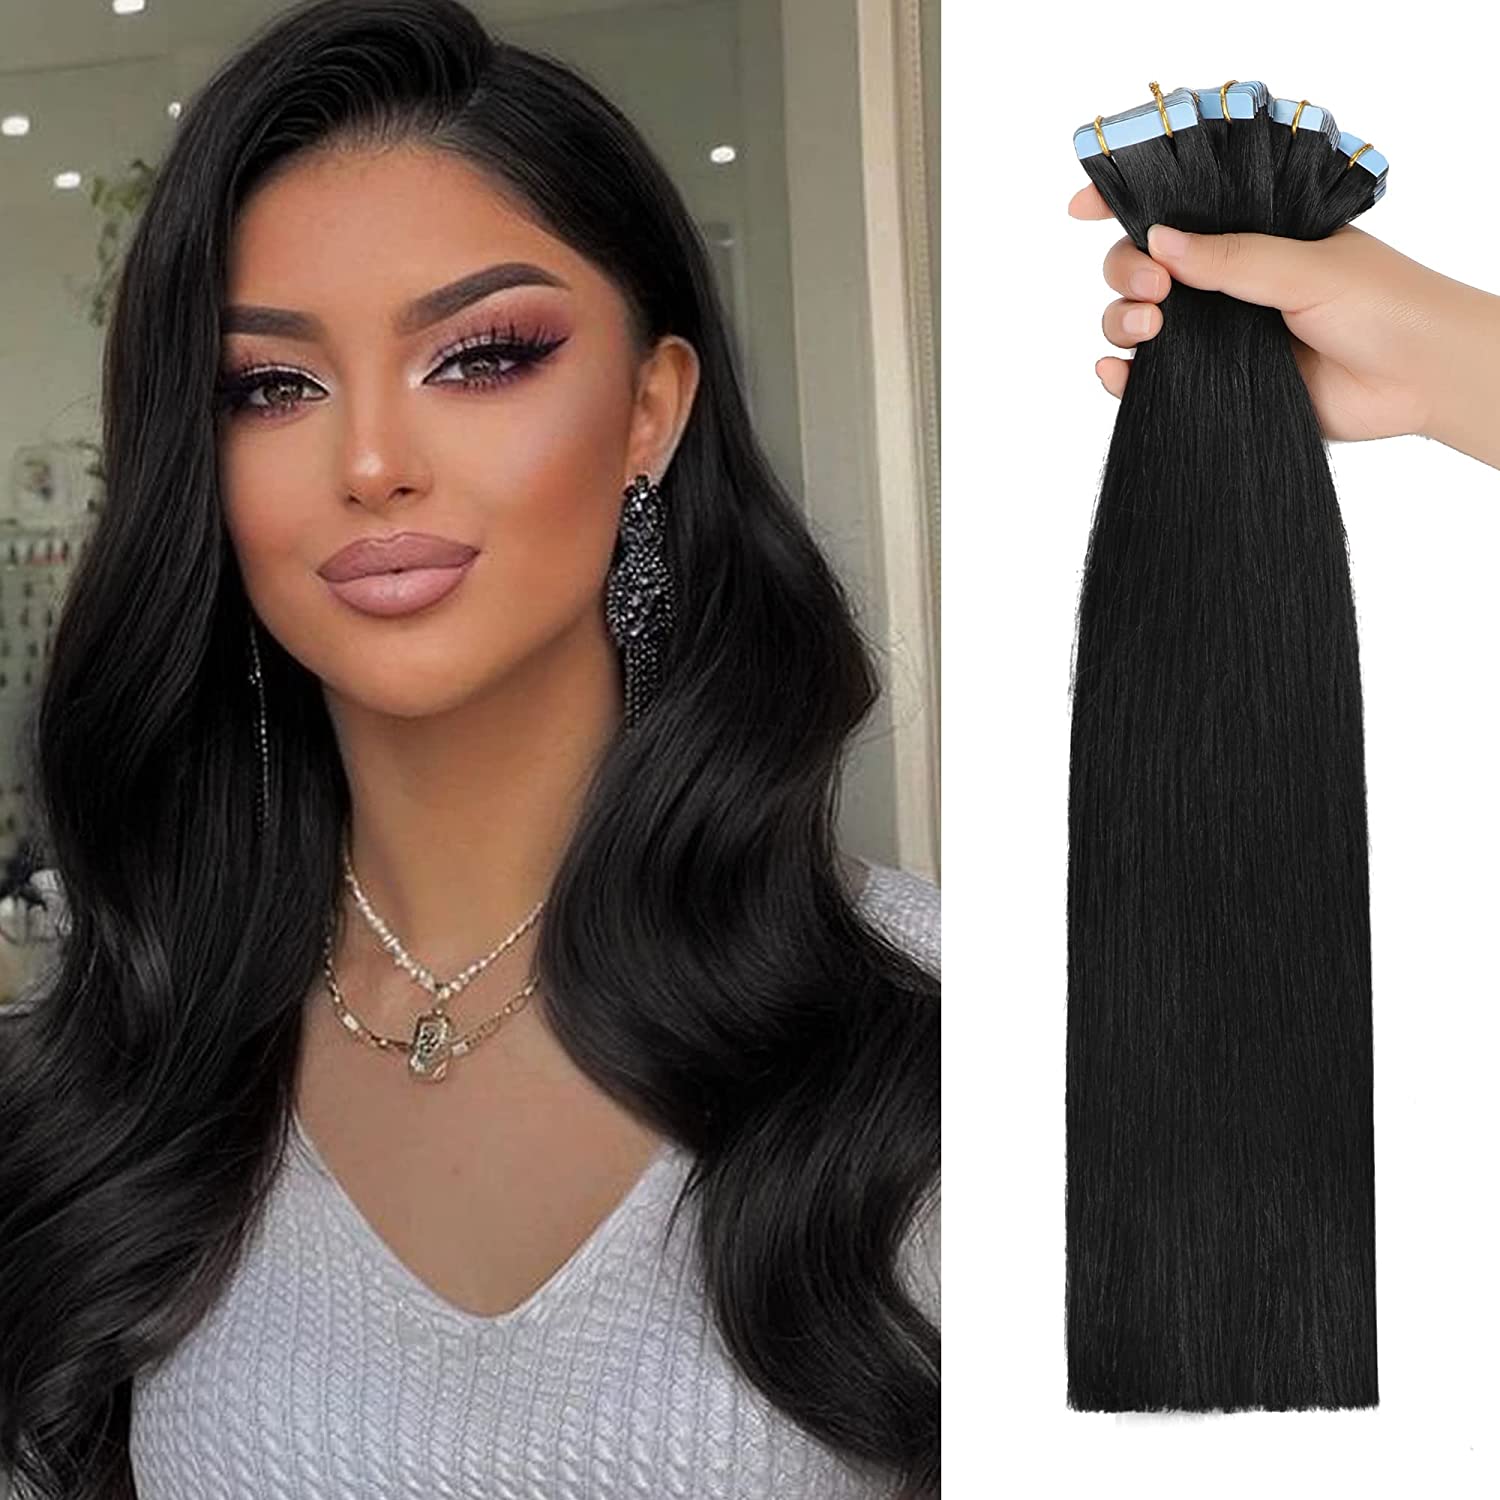 YILITE Tape in Hair Extensions Human Hair Jet Black 100% Remy Human Hair 12 inch-24inch 20pcs pack Seamless Skin Weft Tape in Extensions for White Women